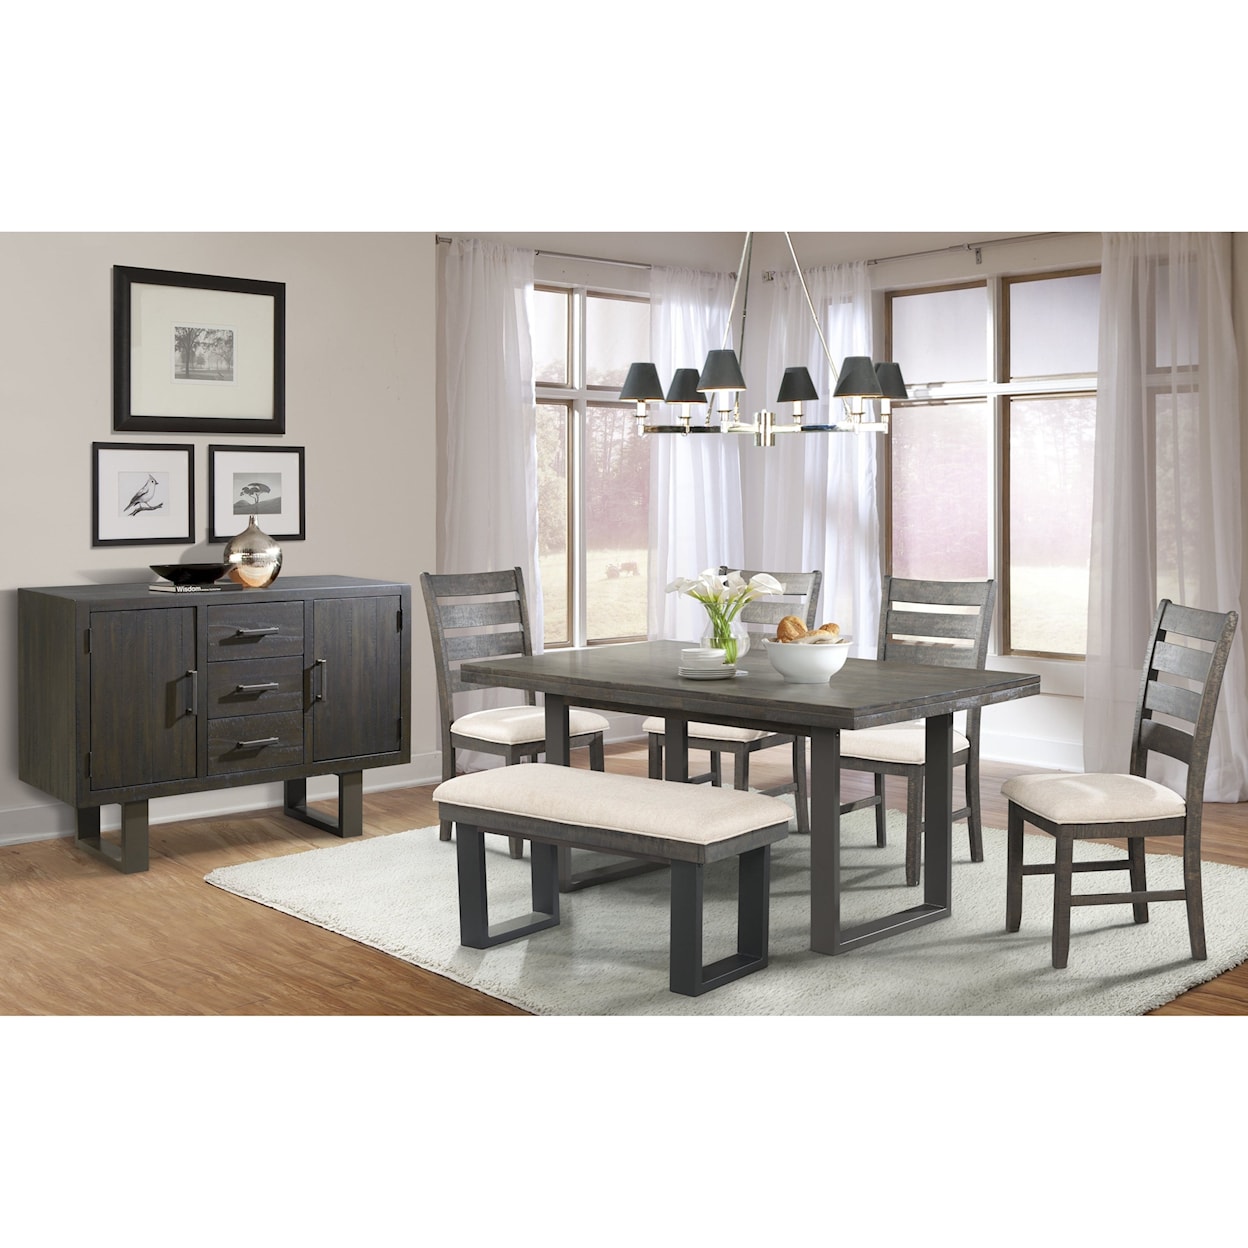 Elements International Sawyer Dining Table Set with Bench